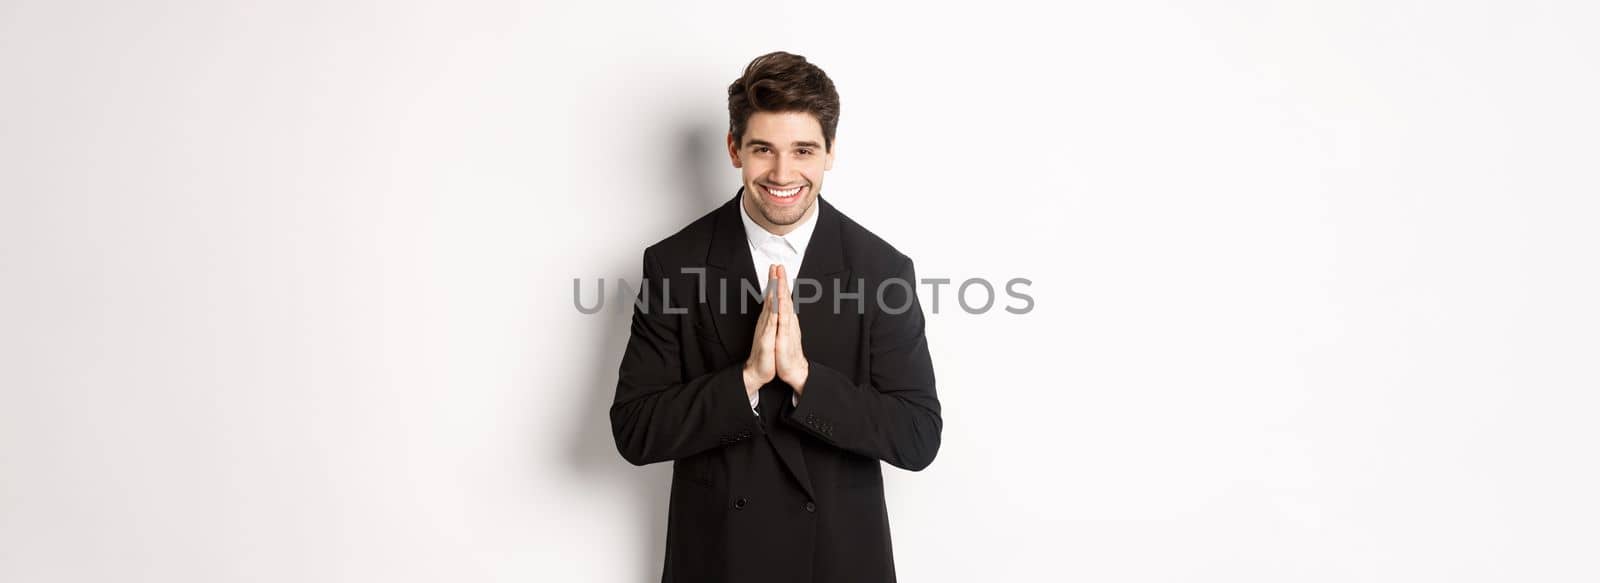 Portrait of handsome man in black suit, being grateful, saying thank you and bowing politely, smiling as holding hands together, expressing gratitude, standing over white background.